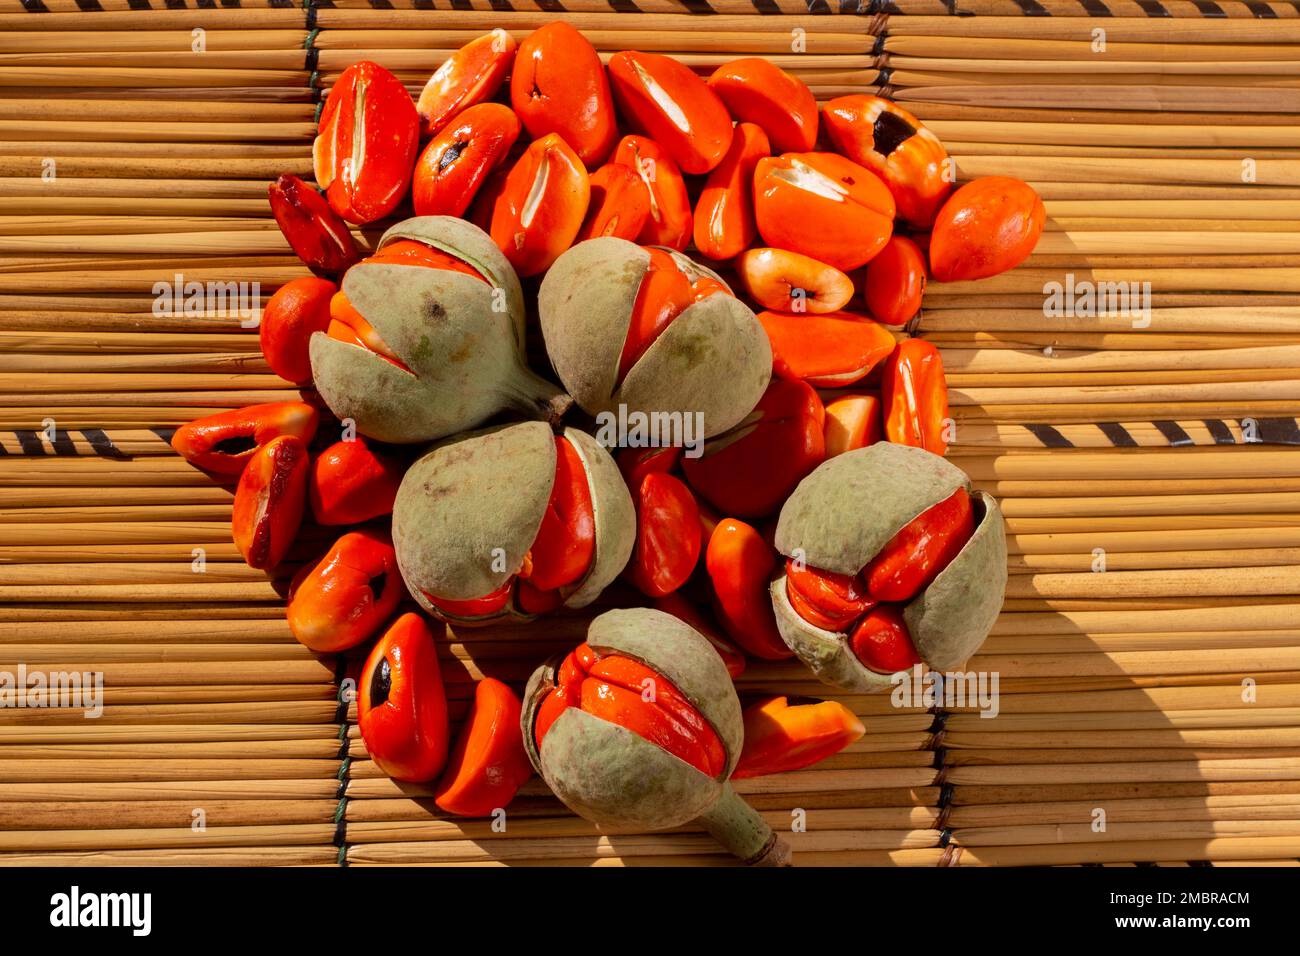 A basket of ripe Trichilia emetica, also known as Natal mahogany or mafura, with some of its distinctive red seeds still nestled in the pod Stock Photo